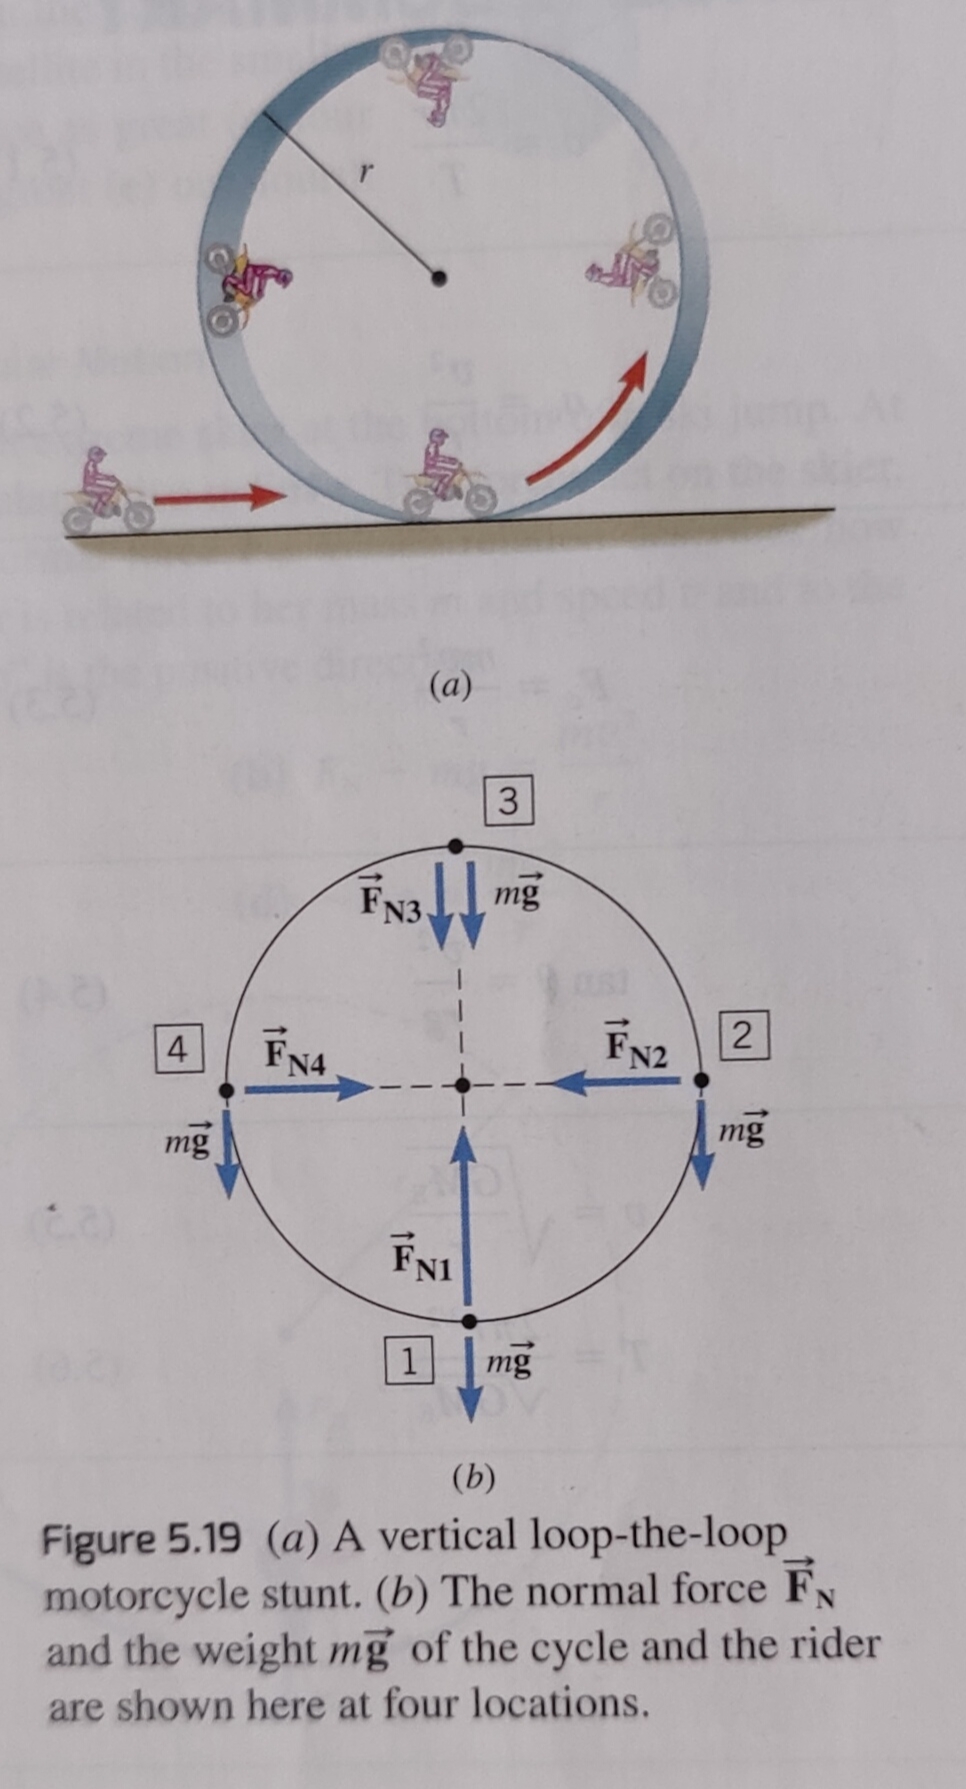 4
mg
FN4
(a)
3
11 mg
FN3.
1
FNI
mg
F22
mg
(b)
Figure 5.19 (a) A vertical loop-the-loop
motorcycle stunt. (b) The normal force F
and the weight mg of the cycle and the rider
are shown here at four locations.